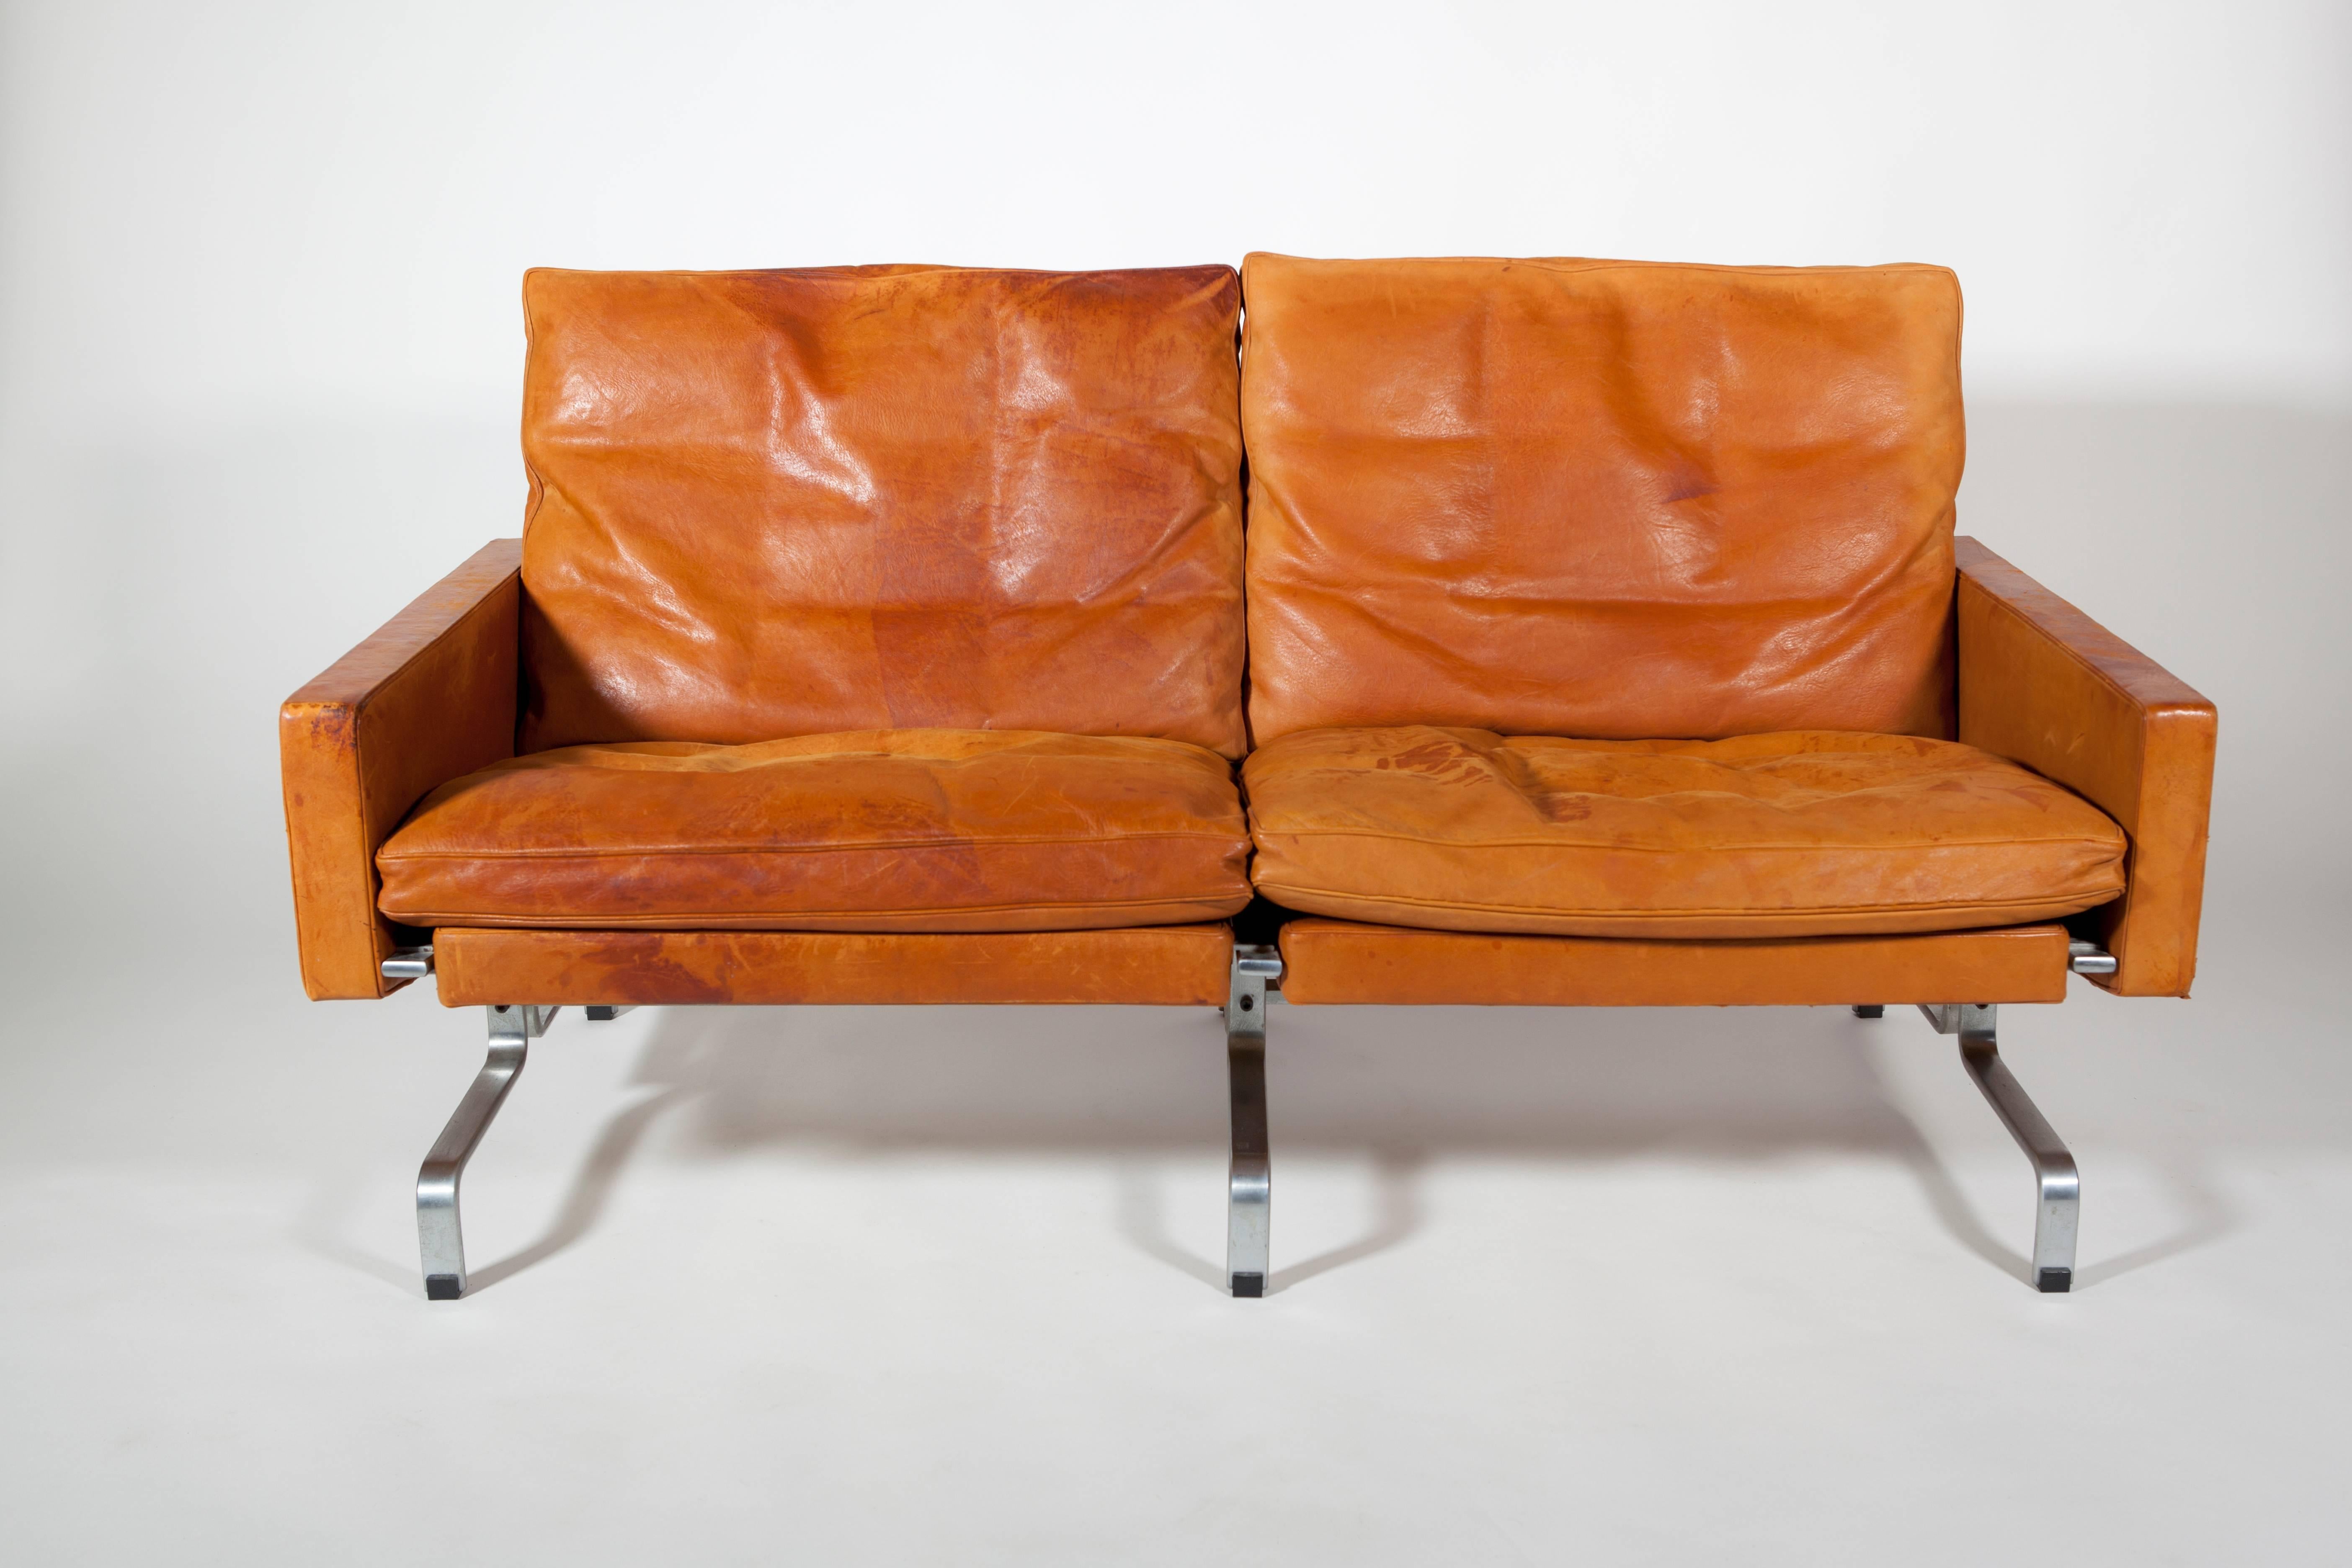 This vintage steel and leather sofa, model PK31/2, is an early Industrial Design of Danish designer Poul Kjaerholm. This sofa was part of the rare first series produced by E. Kold Christensen, shortly after 1958. The sofa has been used as it was